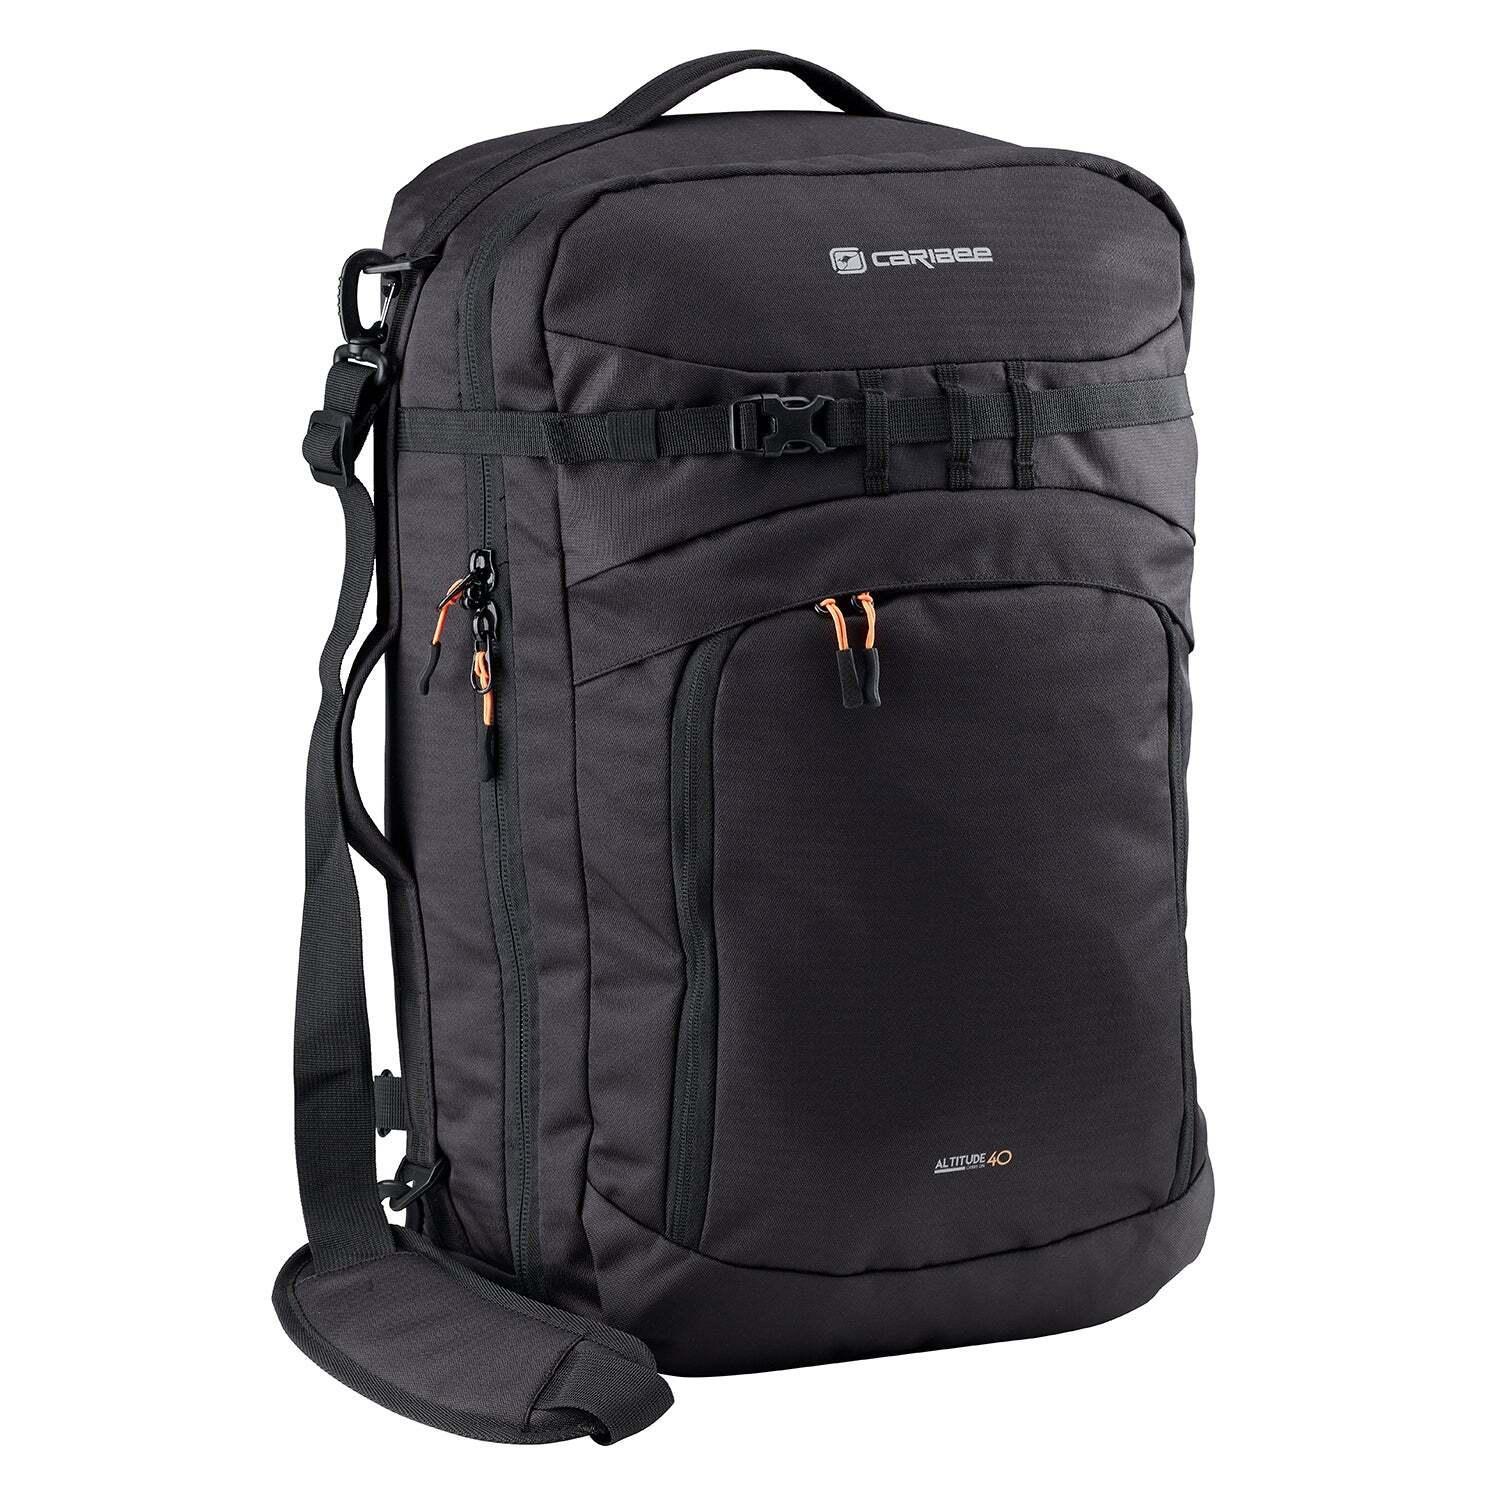 Caribee Altitude 40 L Carry On Backpack 6909